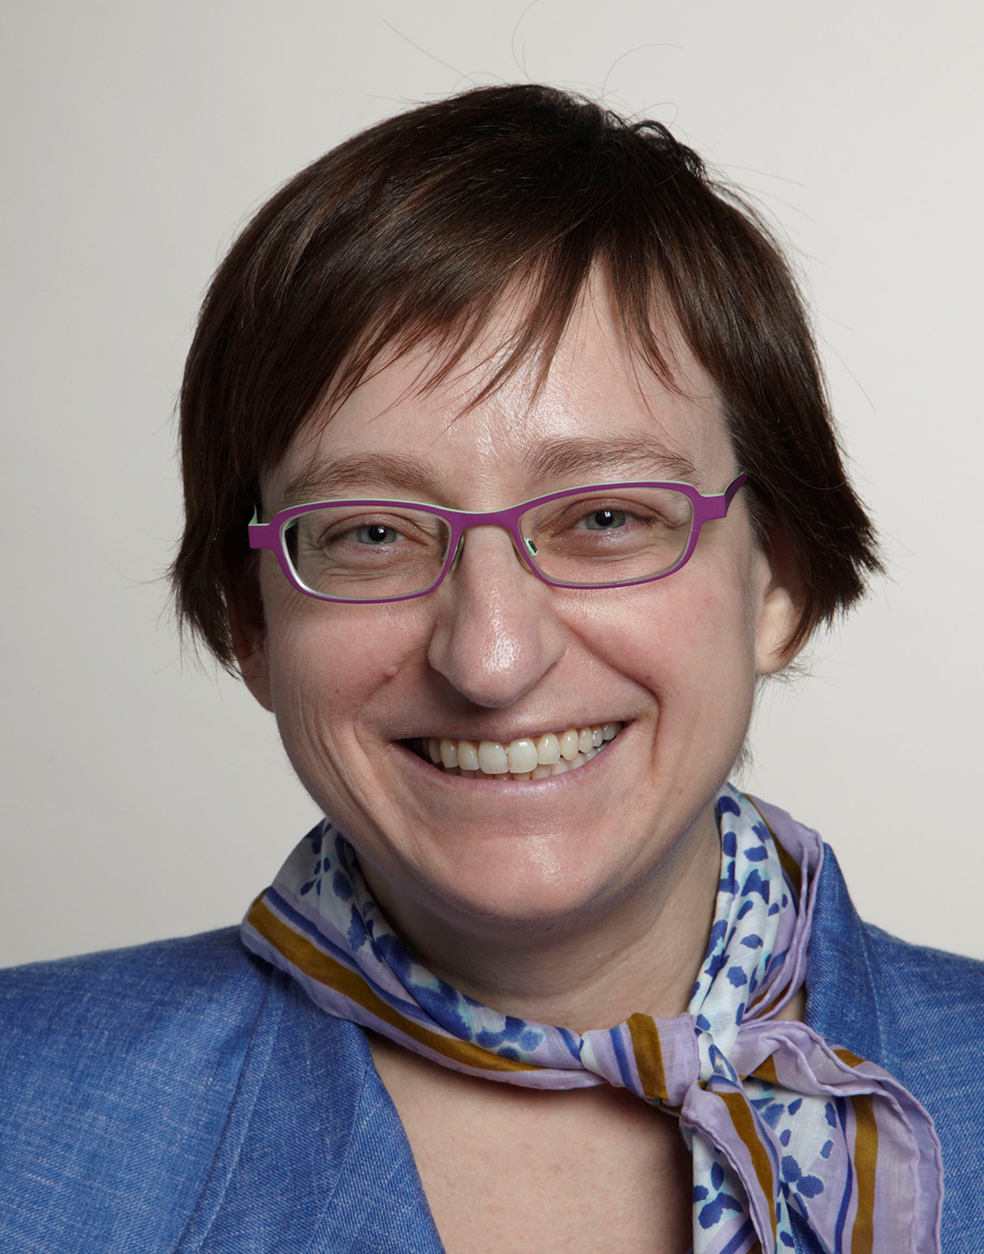 Patricia Kovatch, wearing glasses and smiling at the cameraDescription automatically generated